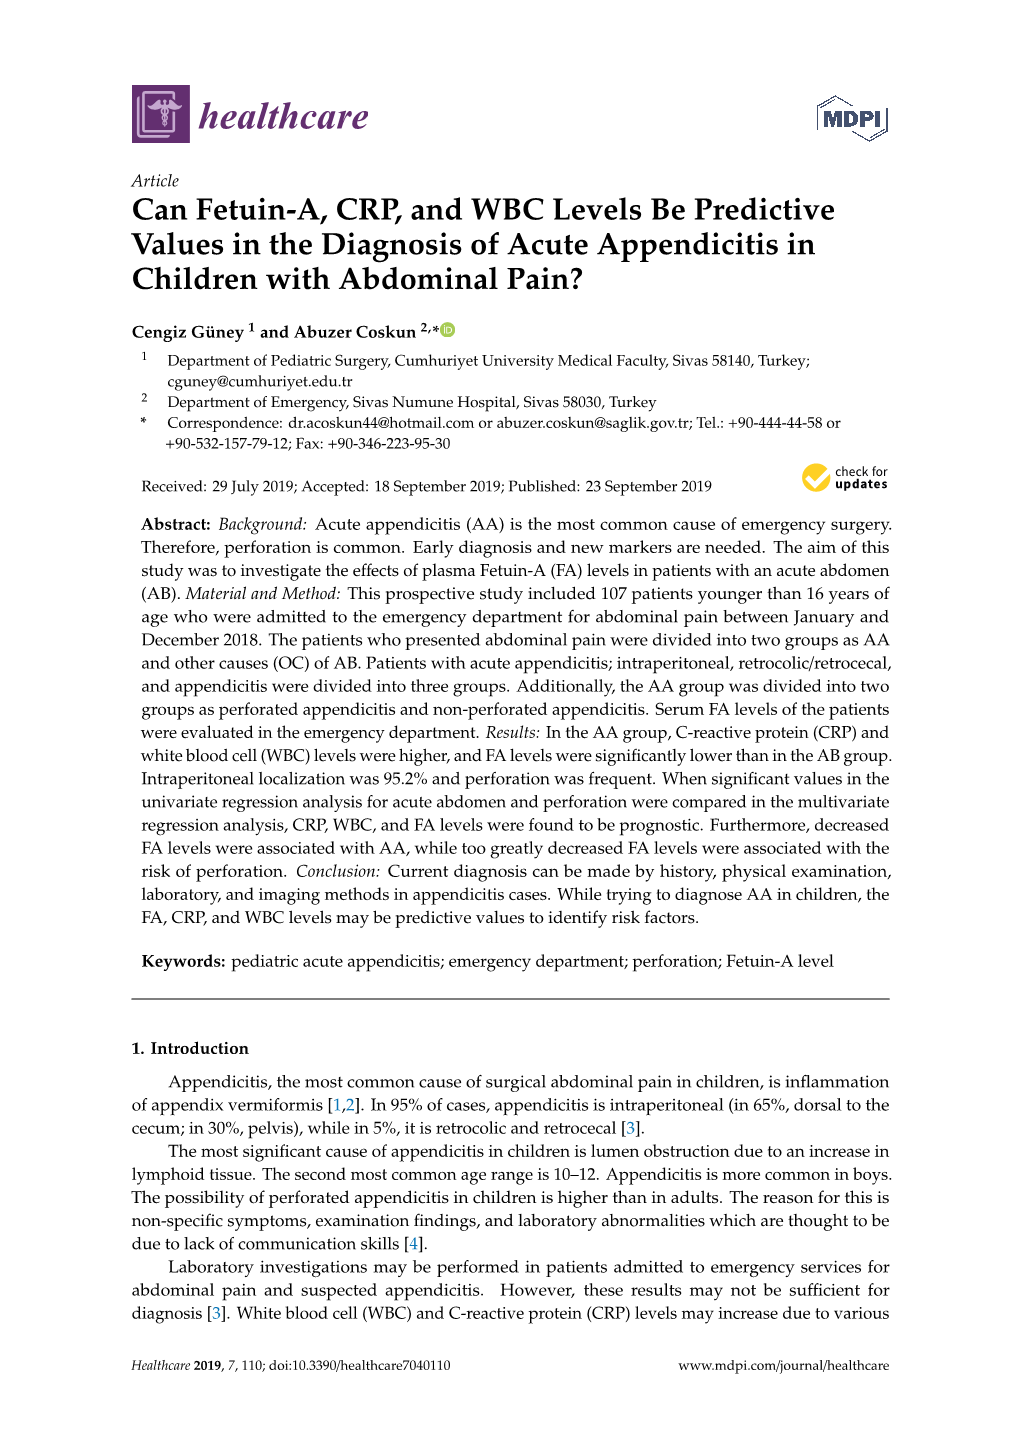 Can Fetuin-A, CRP, and WBC Levels Be Predictive Values in the Diagnosis of Acute Appendicitis in Children with Abdominal Pain?